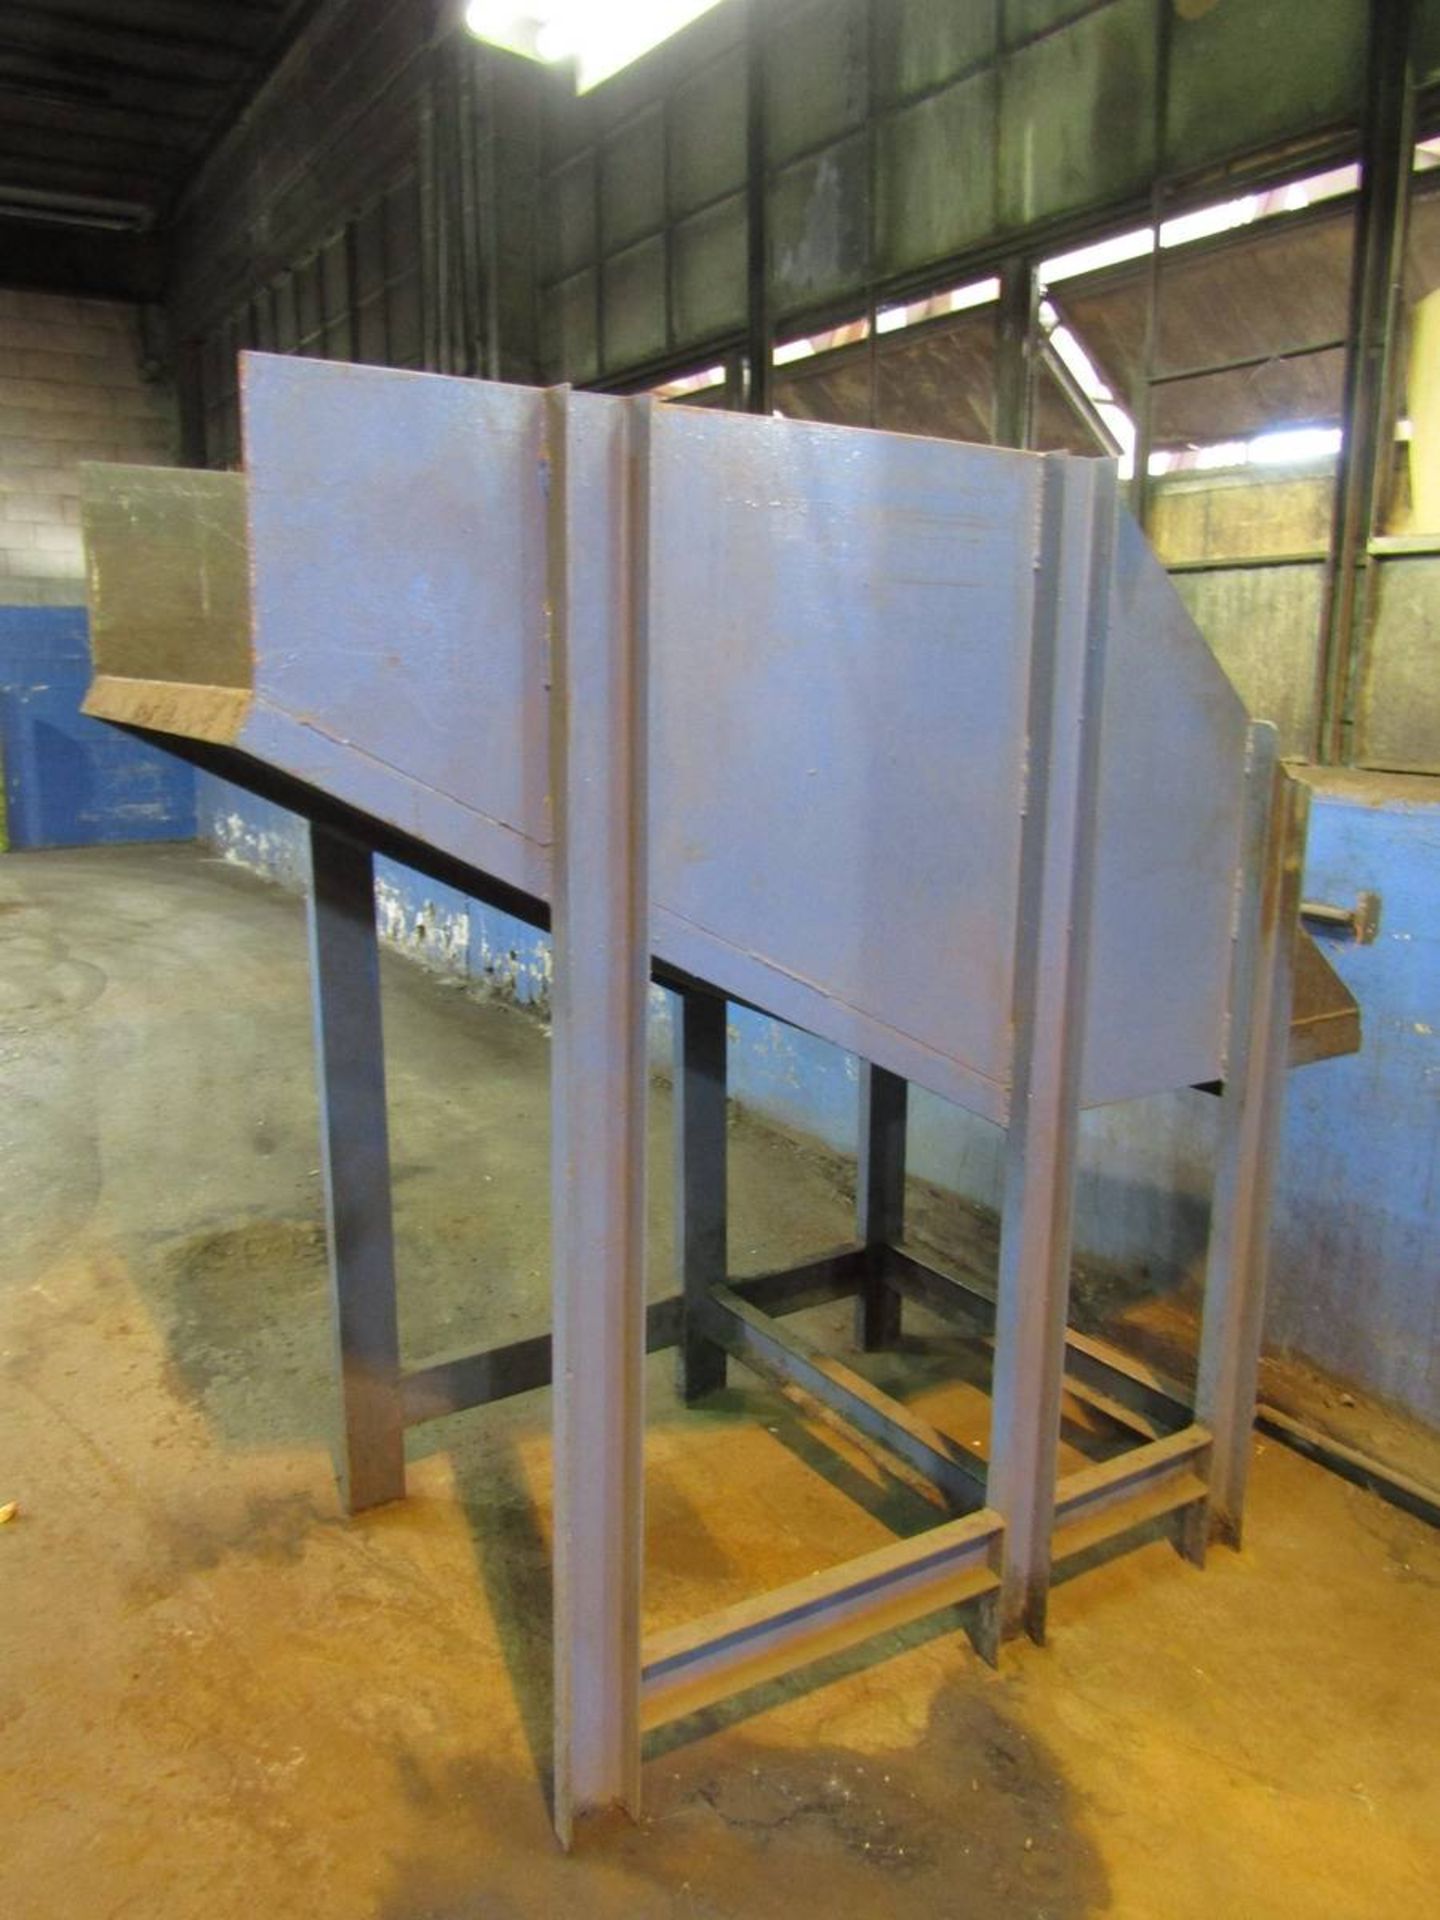 Steel Gravity Feed Sorting Station - Image 2 of 3